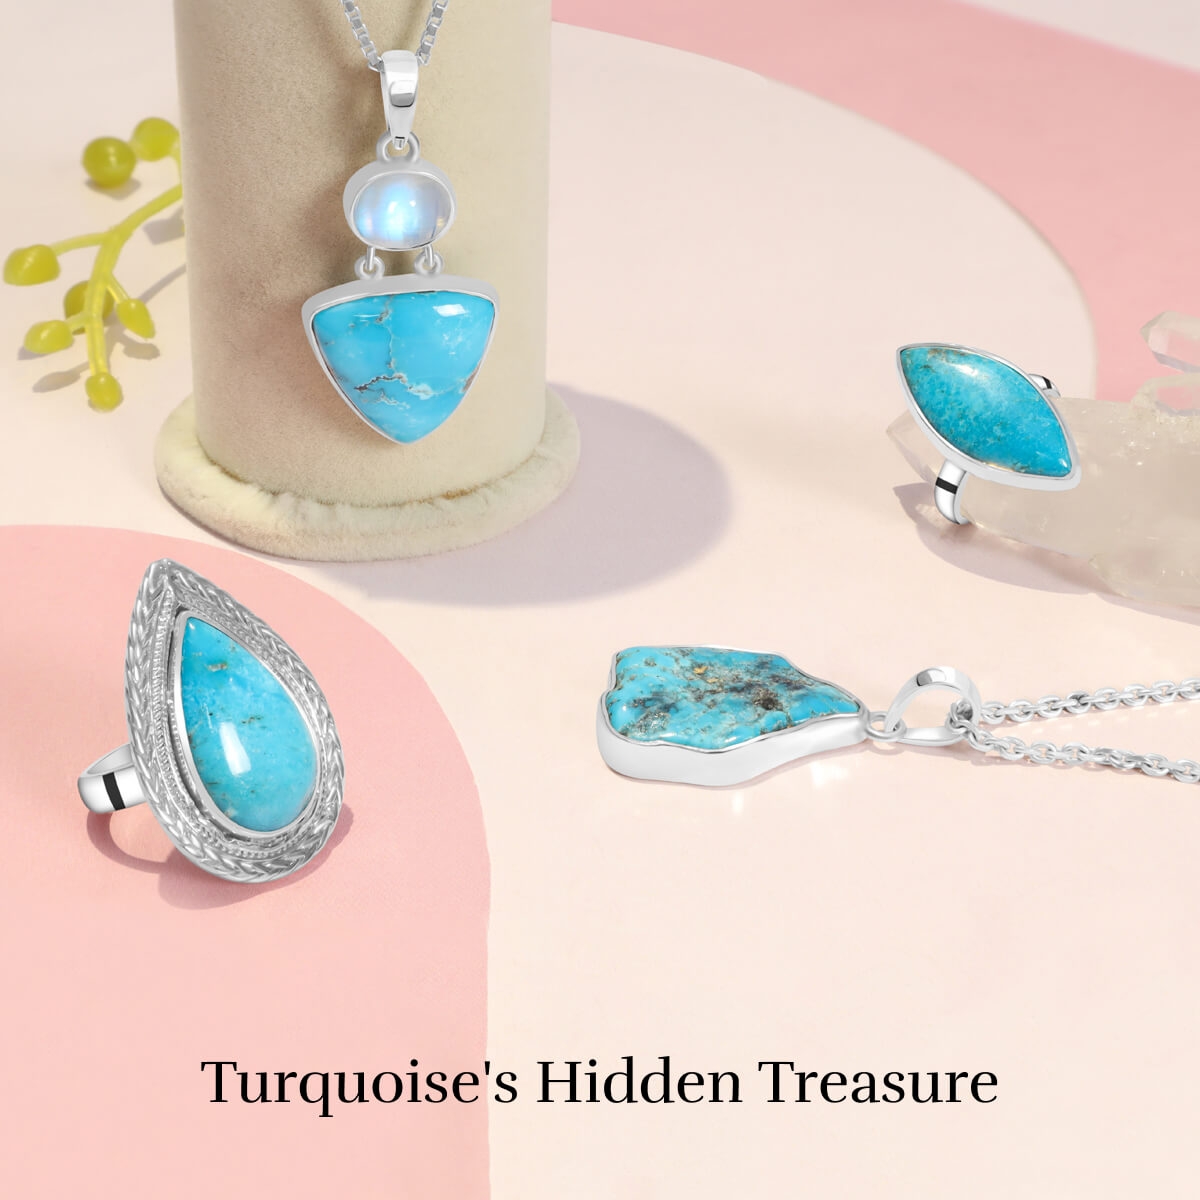 How Much Is Turquoise Worth?